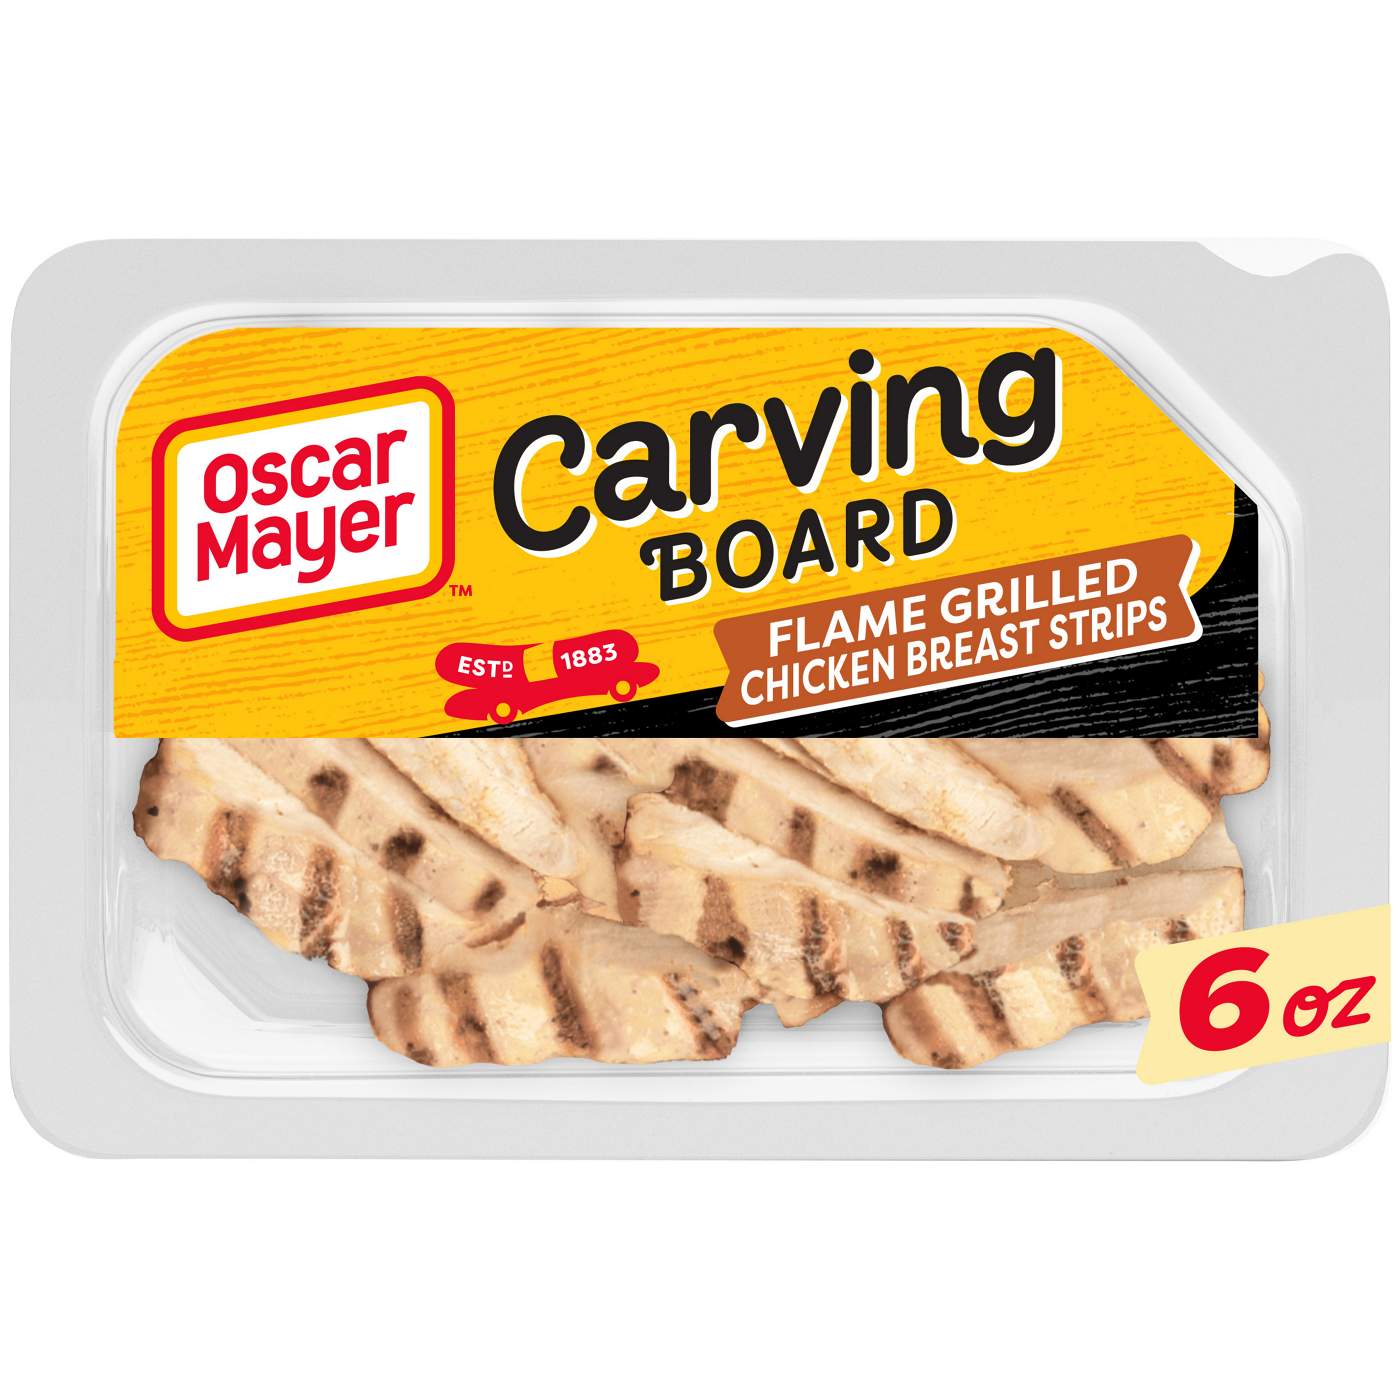 Oscar Mayer Carving Board Flame Grilled Chicken Breast Strips Lunch Meat; image 1 of 2